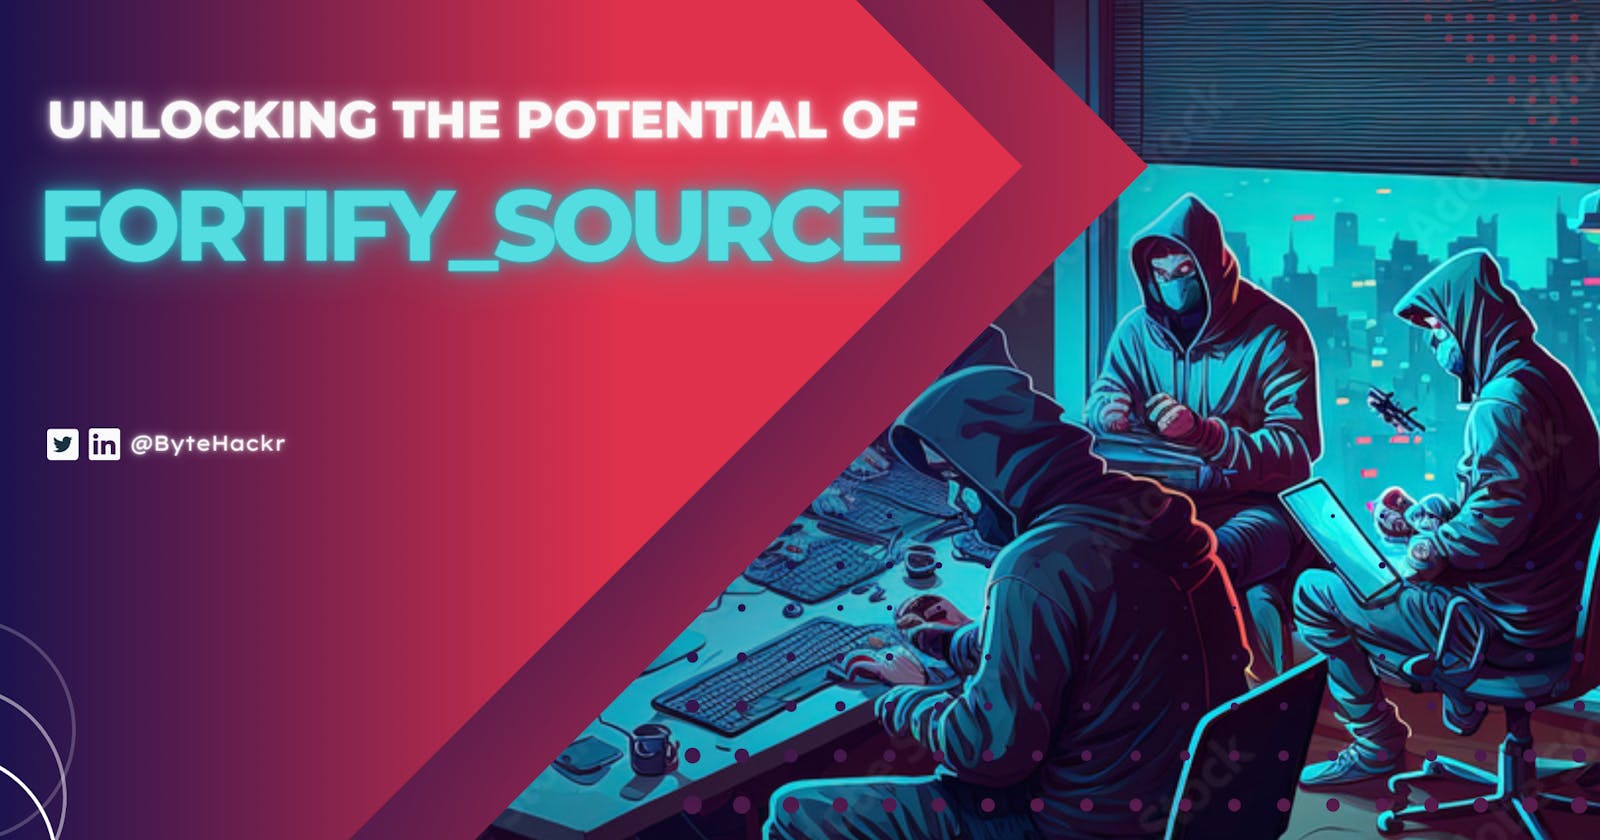 Unlocking the Potential of FORTIFY_SOURCE